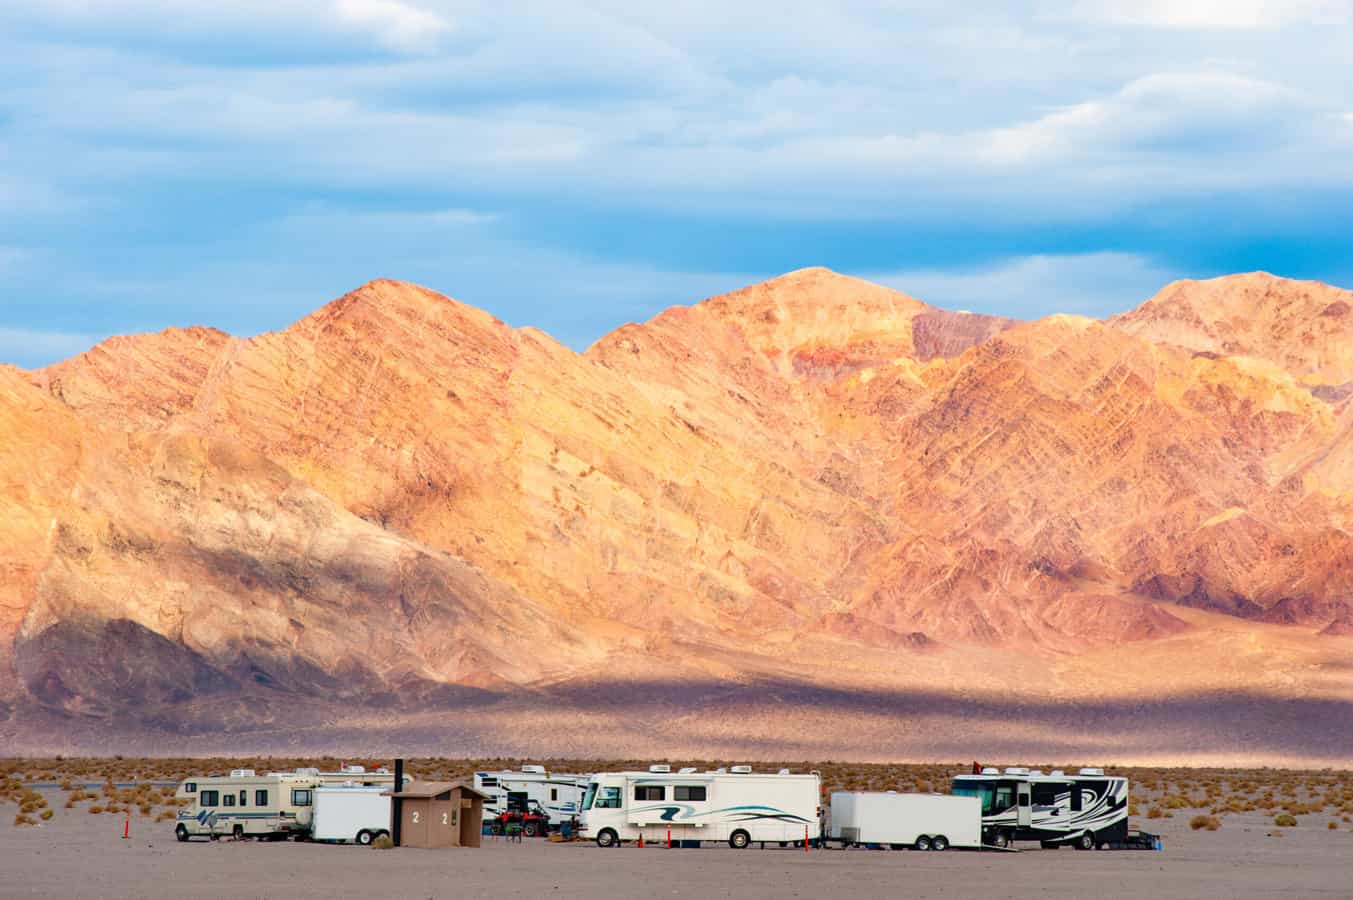 RVs in front of landscape - feature image for private RV parks near national parks